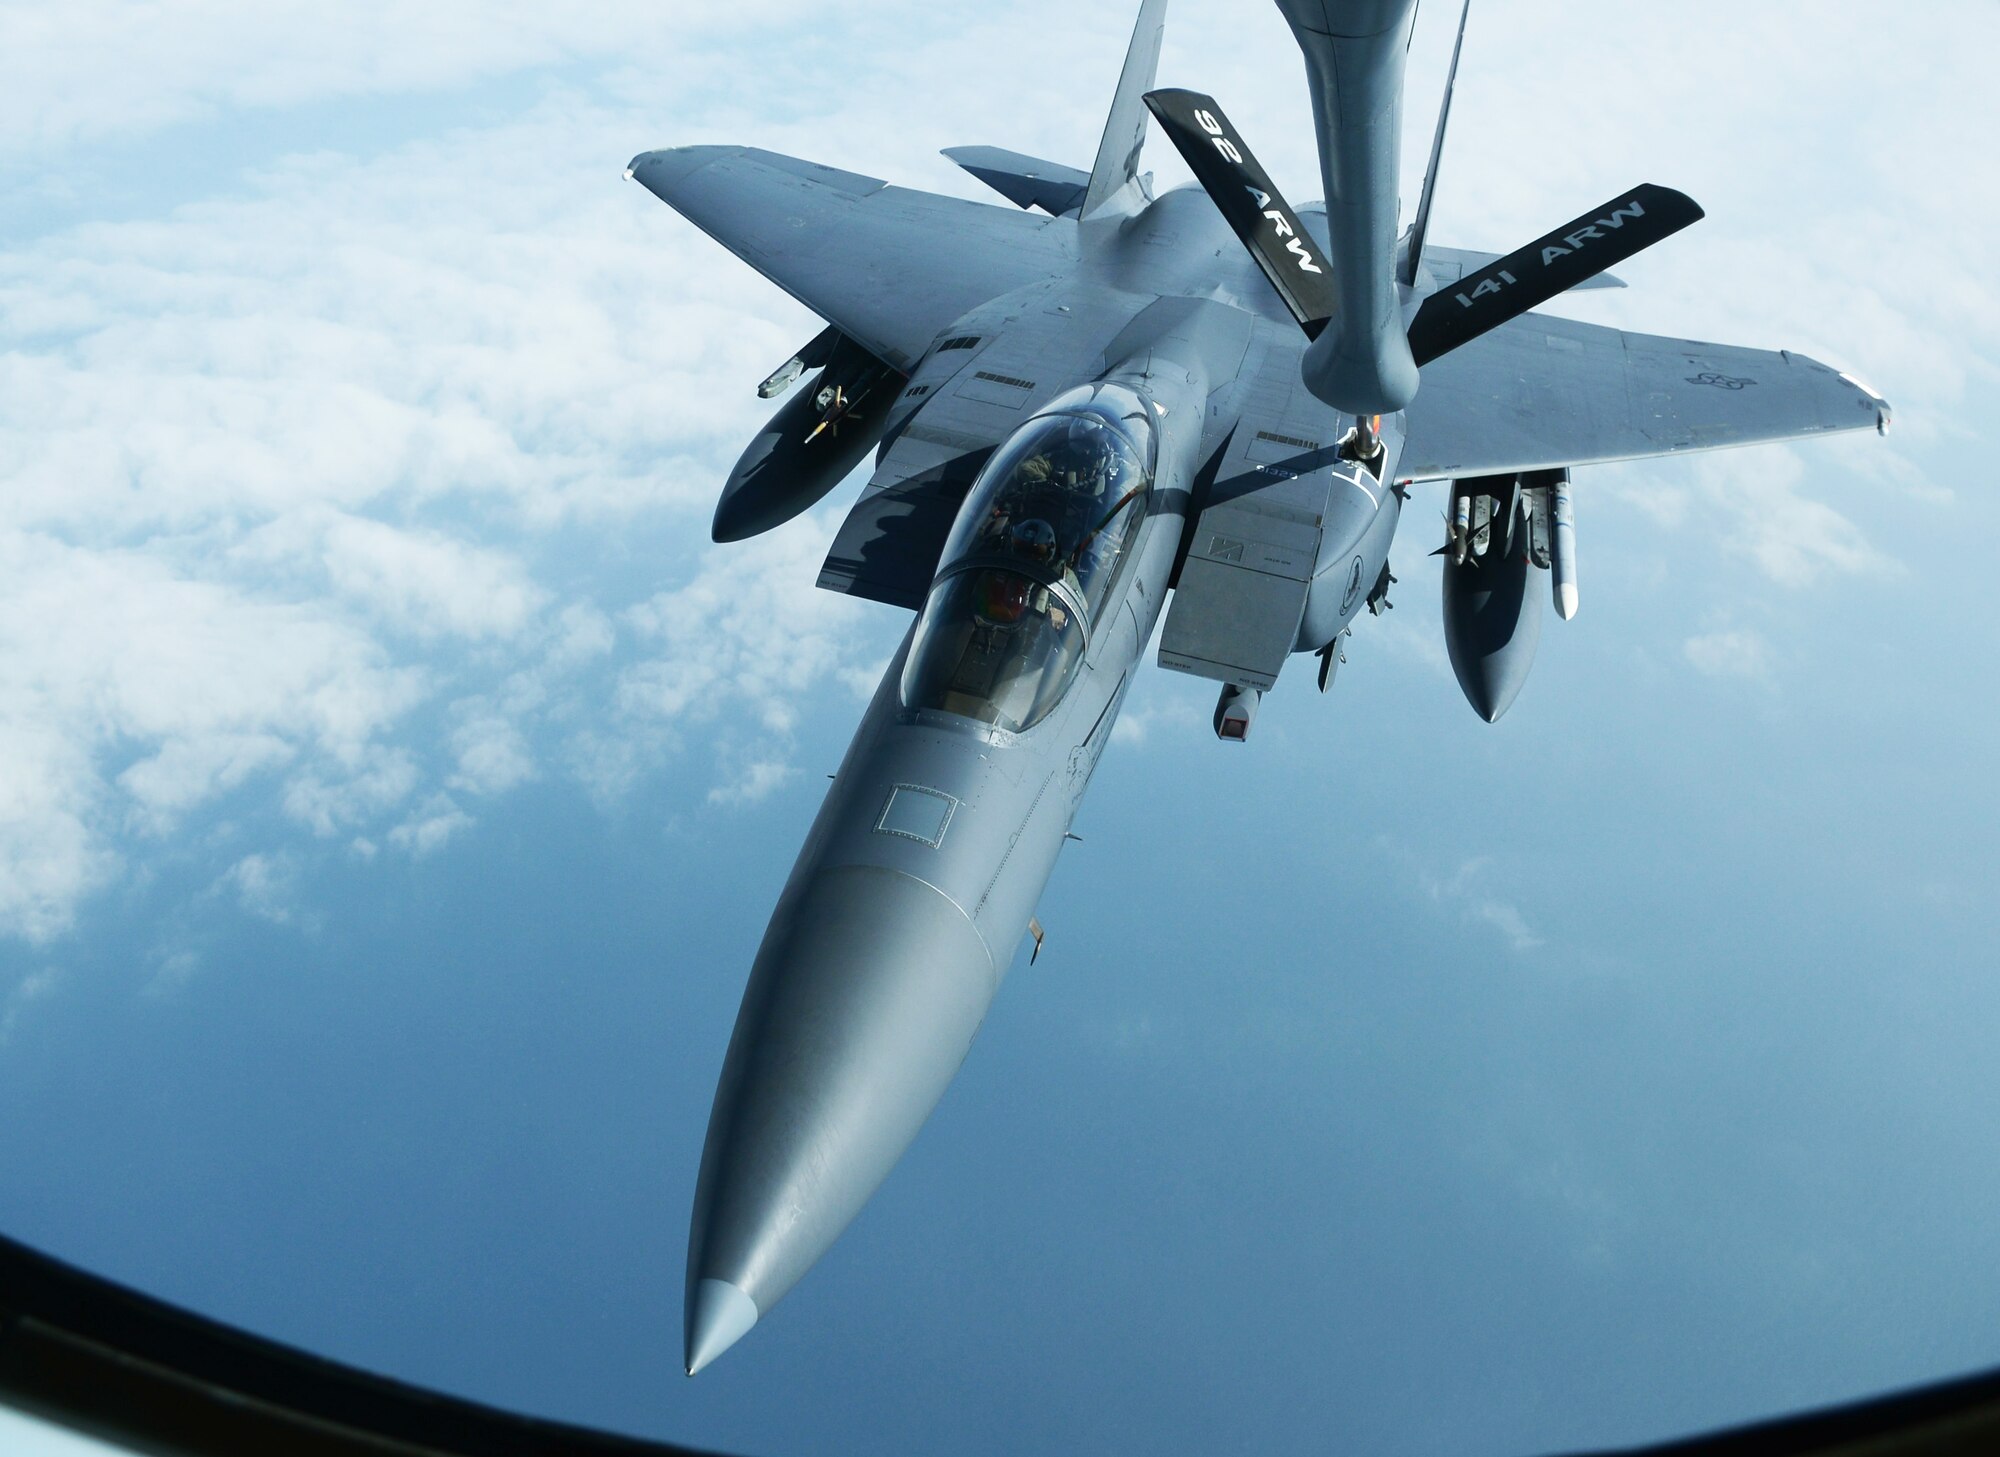 An F-15E Strike Eagle from RAF Lakenheath, England, takes on fuel from a KC-135 Stratotanker from RAF Mildenhall March 28, 2014, during exercise Tonnerre Lightning. The exercise was a combined endeavor between U.S., British and French air force members to train for real world operations. RAF Mildenhall regularly trains with allied armed forces to help strengthen partnerships and standardize training. (U.S. Air Force photo by Airman 1st Class Dillon Johnston)